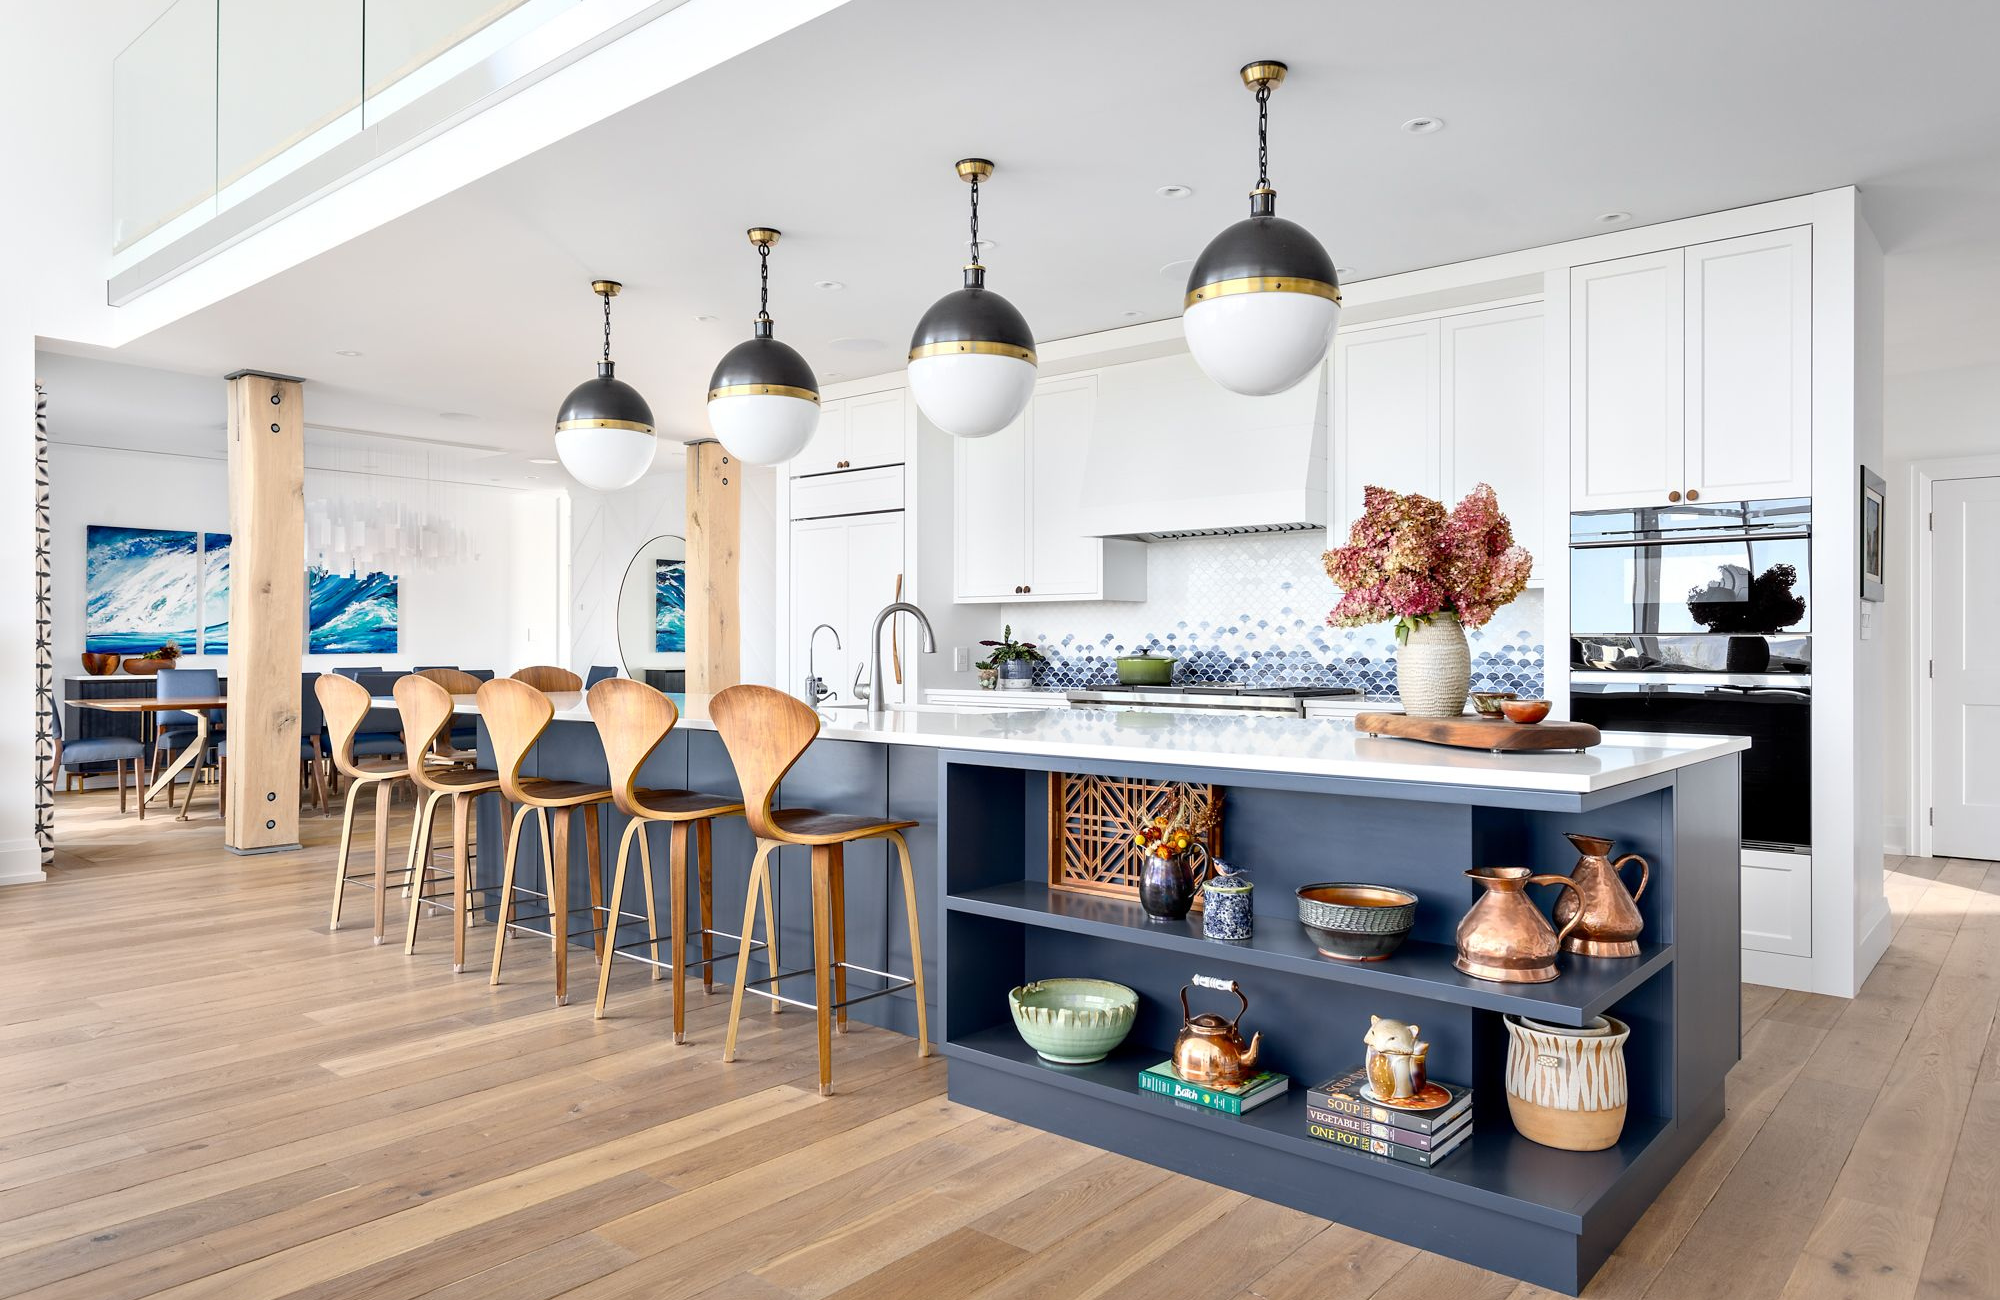 simply-home-decorating-prince-edward-island-home-design-east-coast-meets-west-coast-custom-contemporary-kitchen-navy-cabinets-open-concept